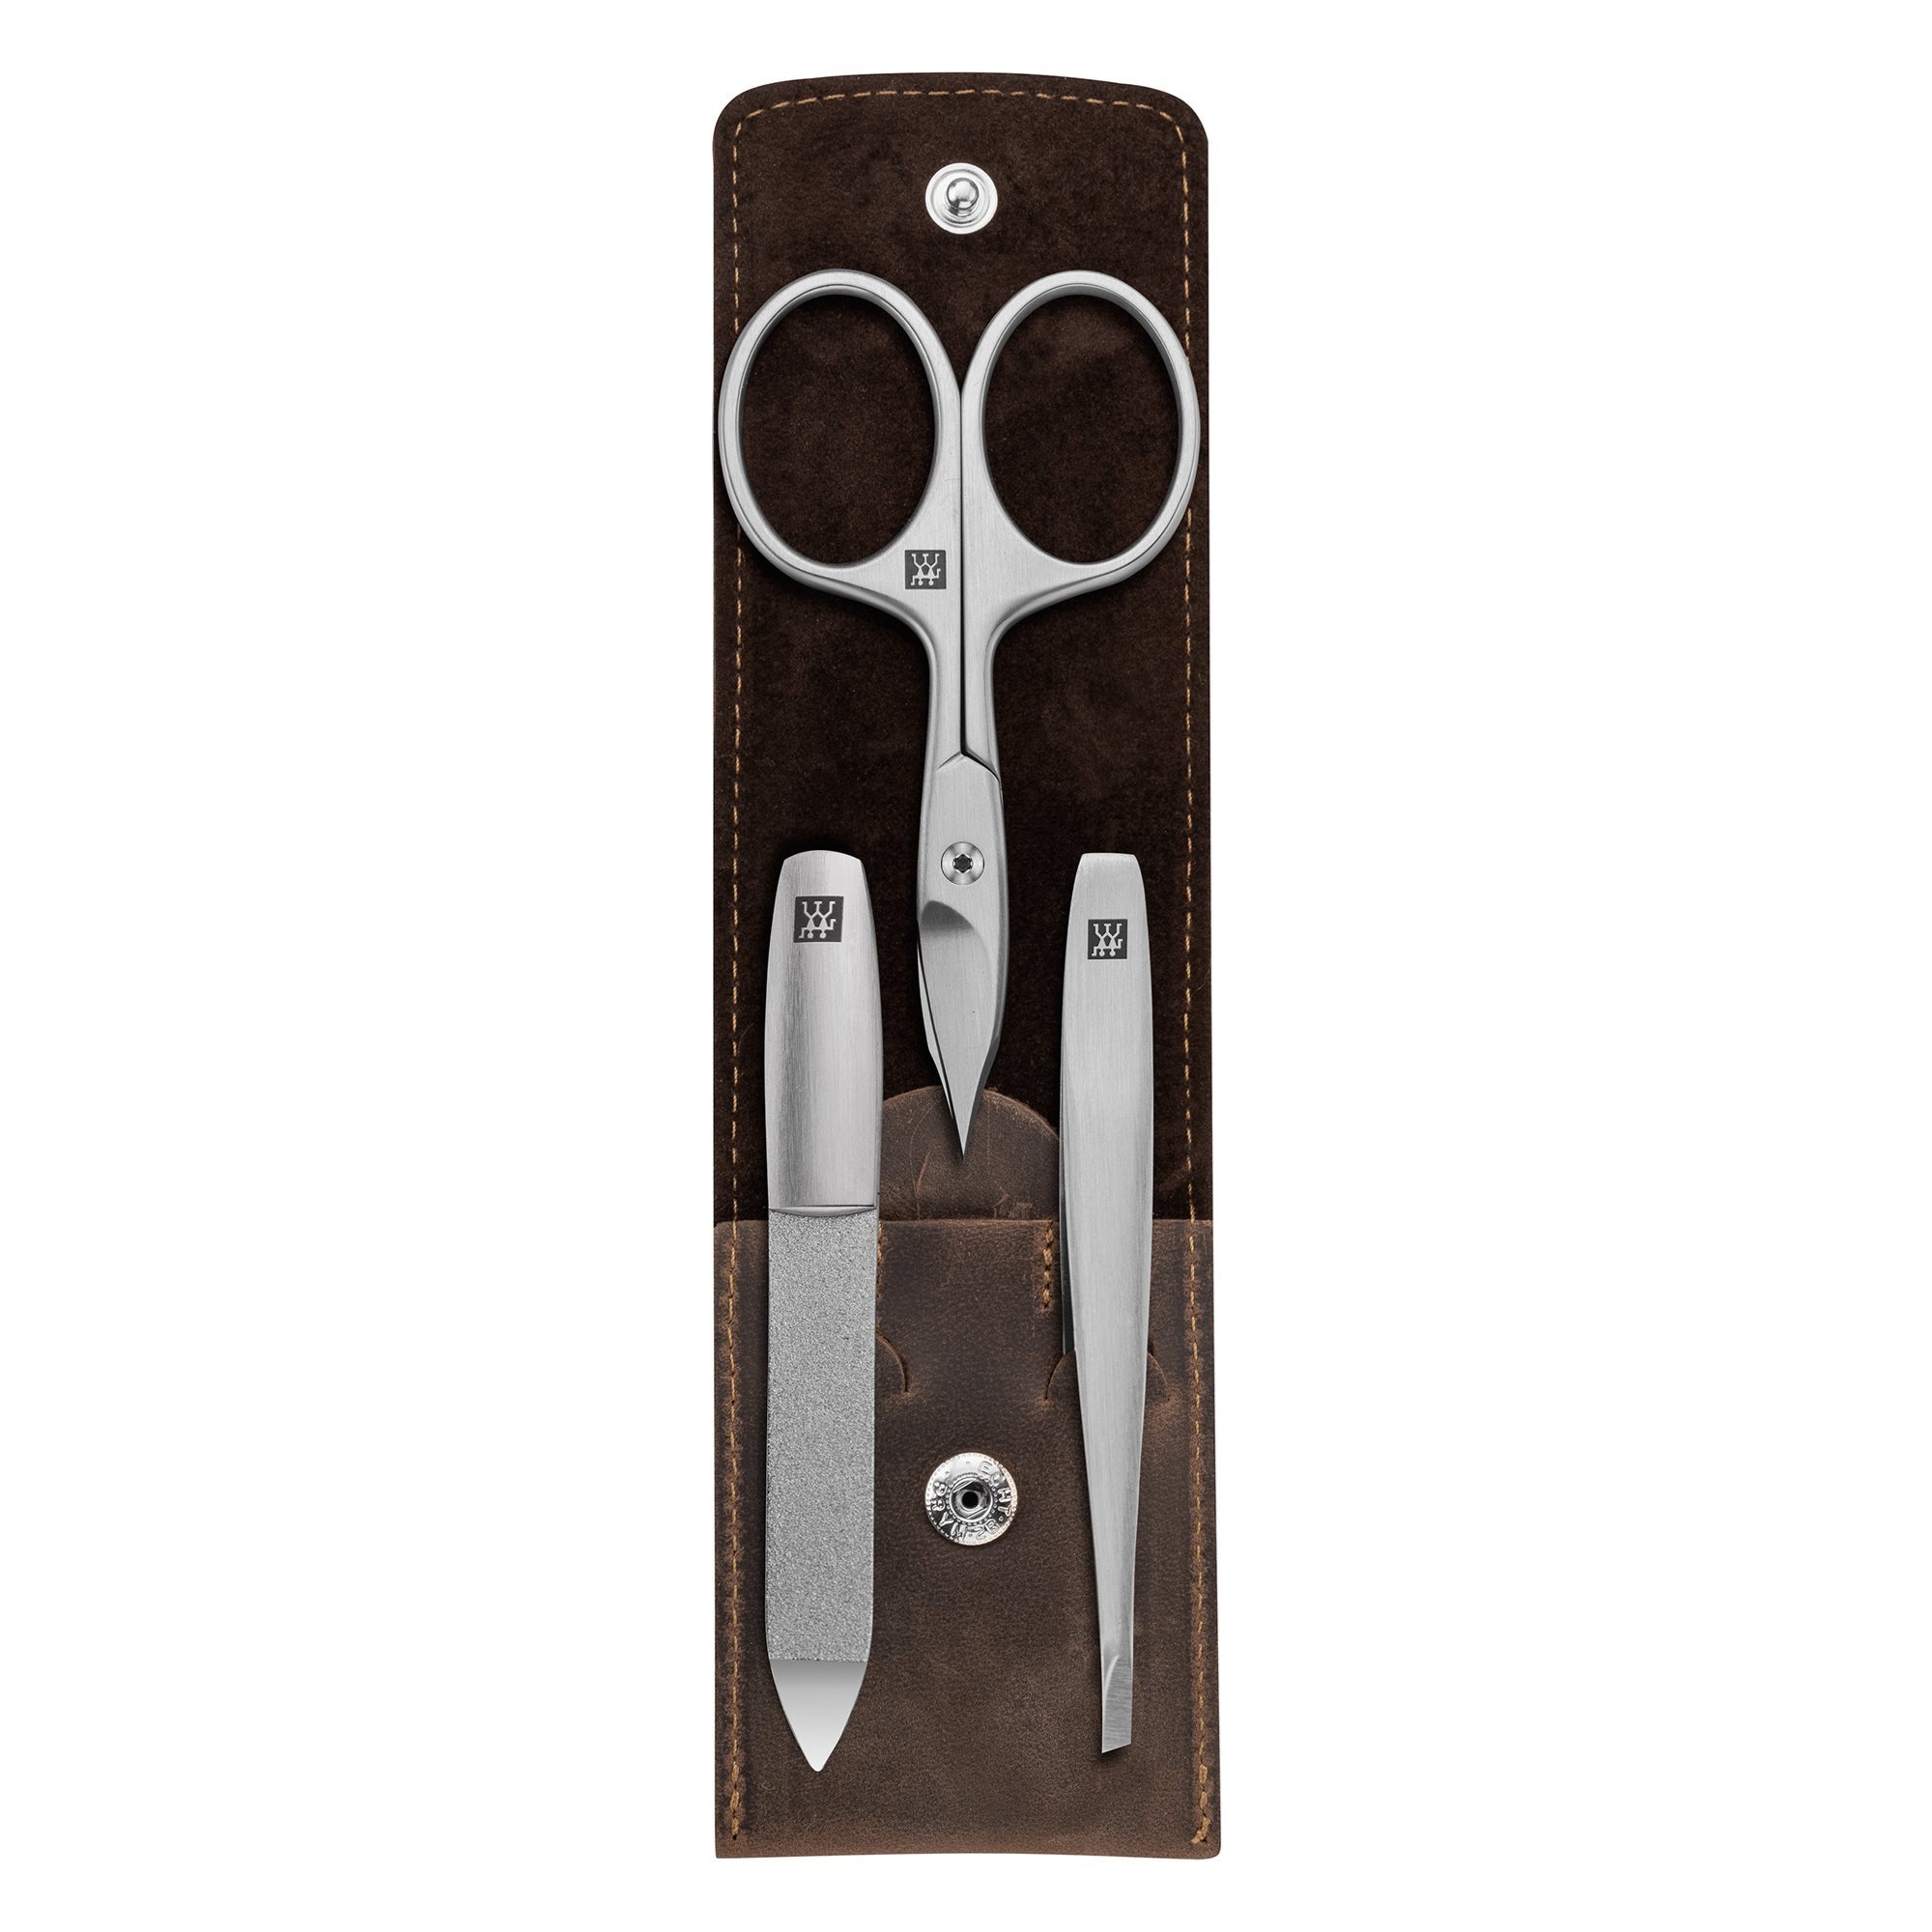 Manicure set, 3 pieces, stainless KitchenShop Zwilling steel, brown leather | case, - PREMIUM